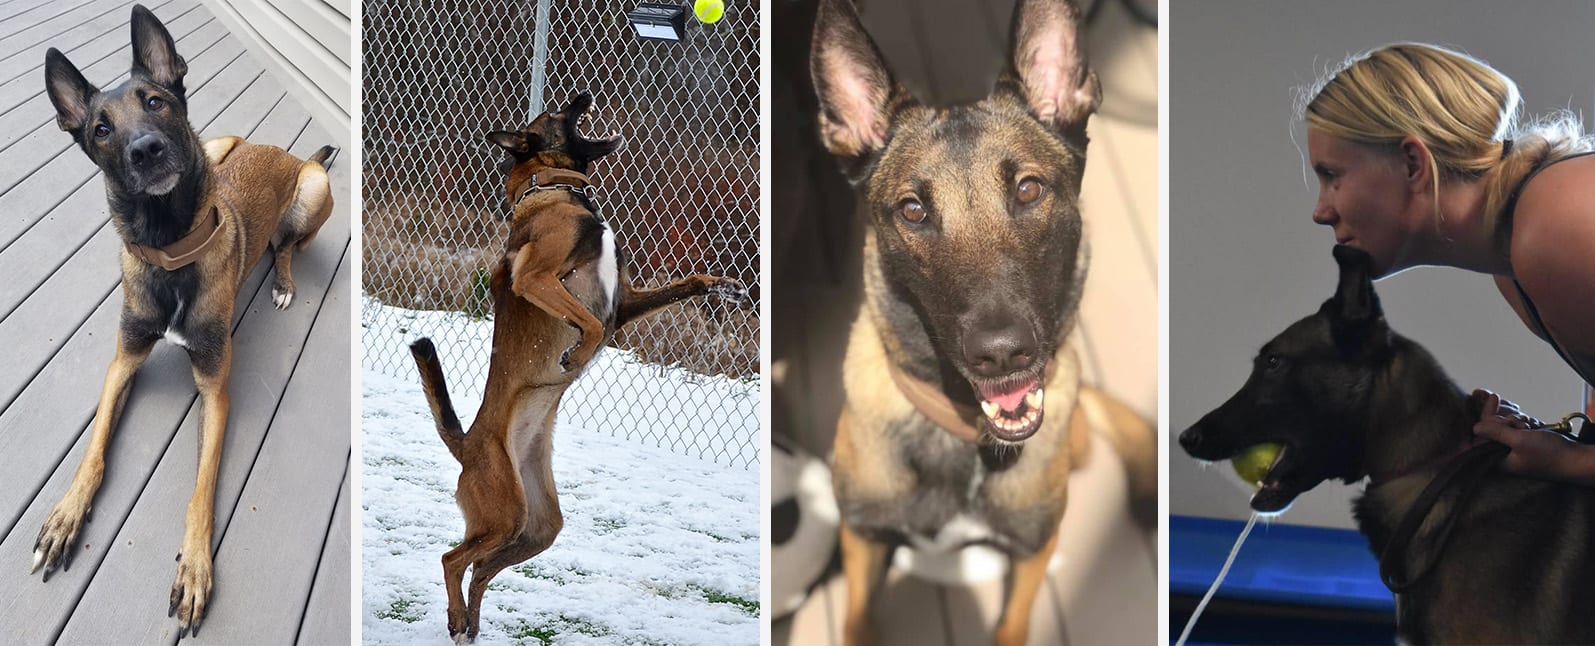 Belgian Malinois: The Hero You Probably Don't Want in Your Home